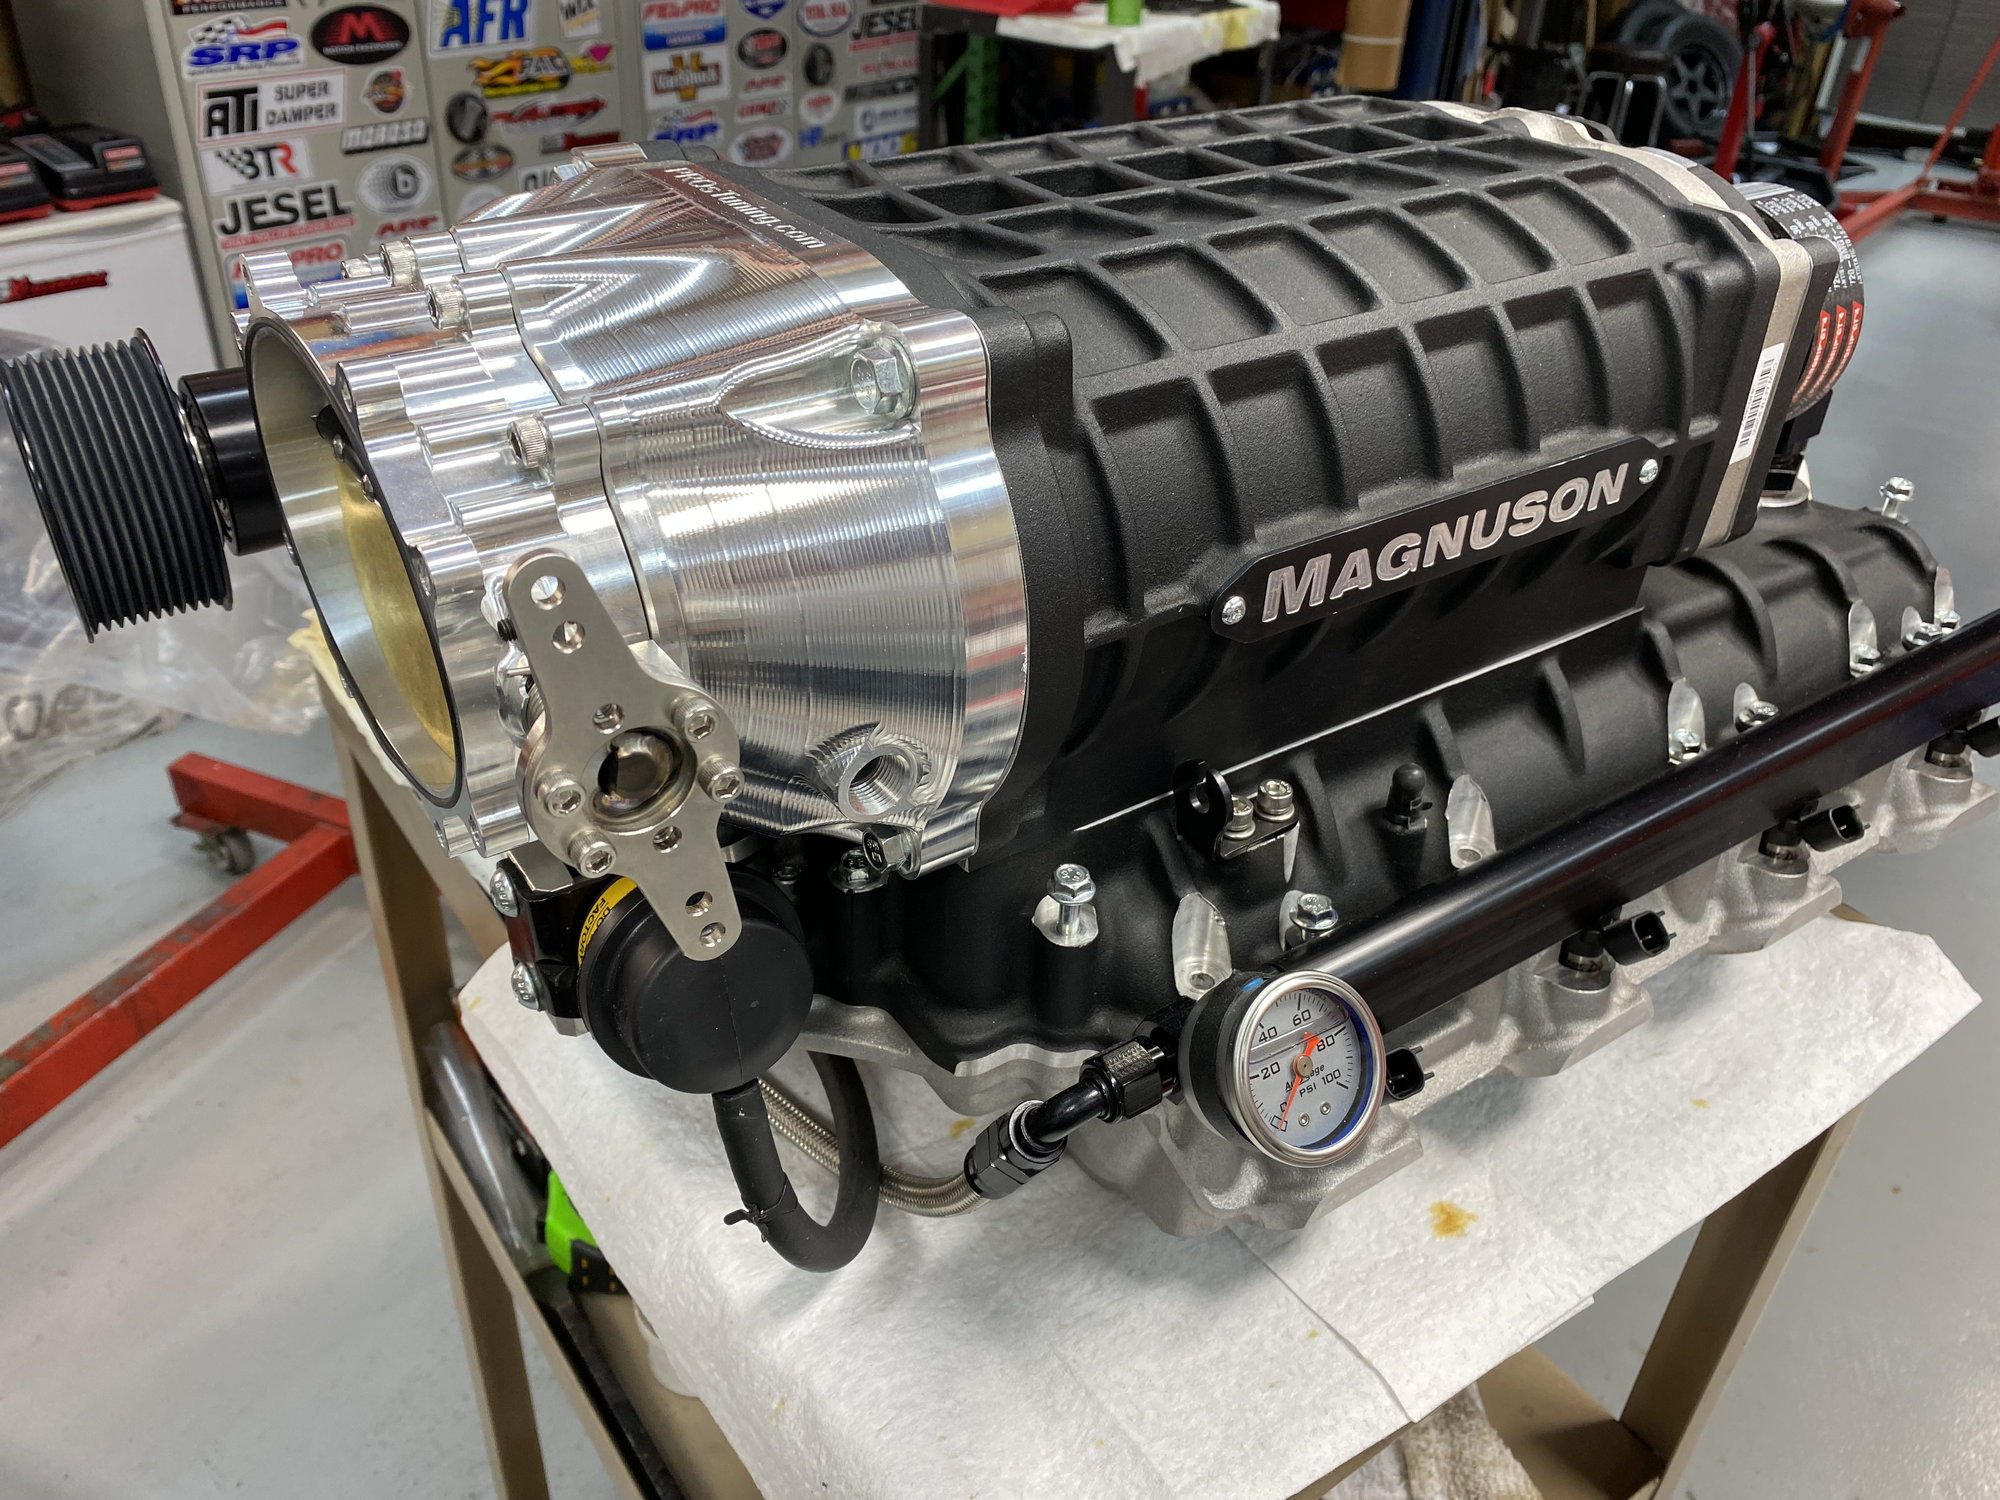 Engine - Power Adders - Magnuson Hot Rod LS3 2650 supercharger system - New - 0  All Models - St. Louis, MO 63129, United States